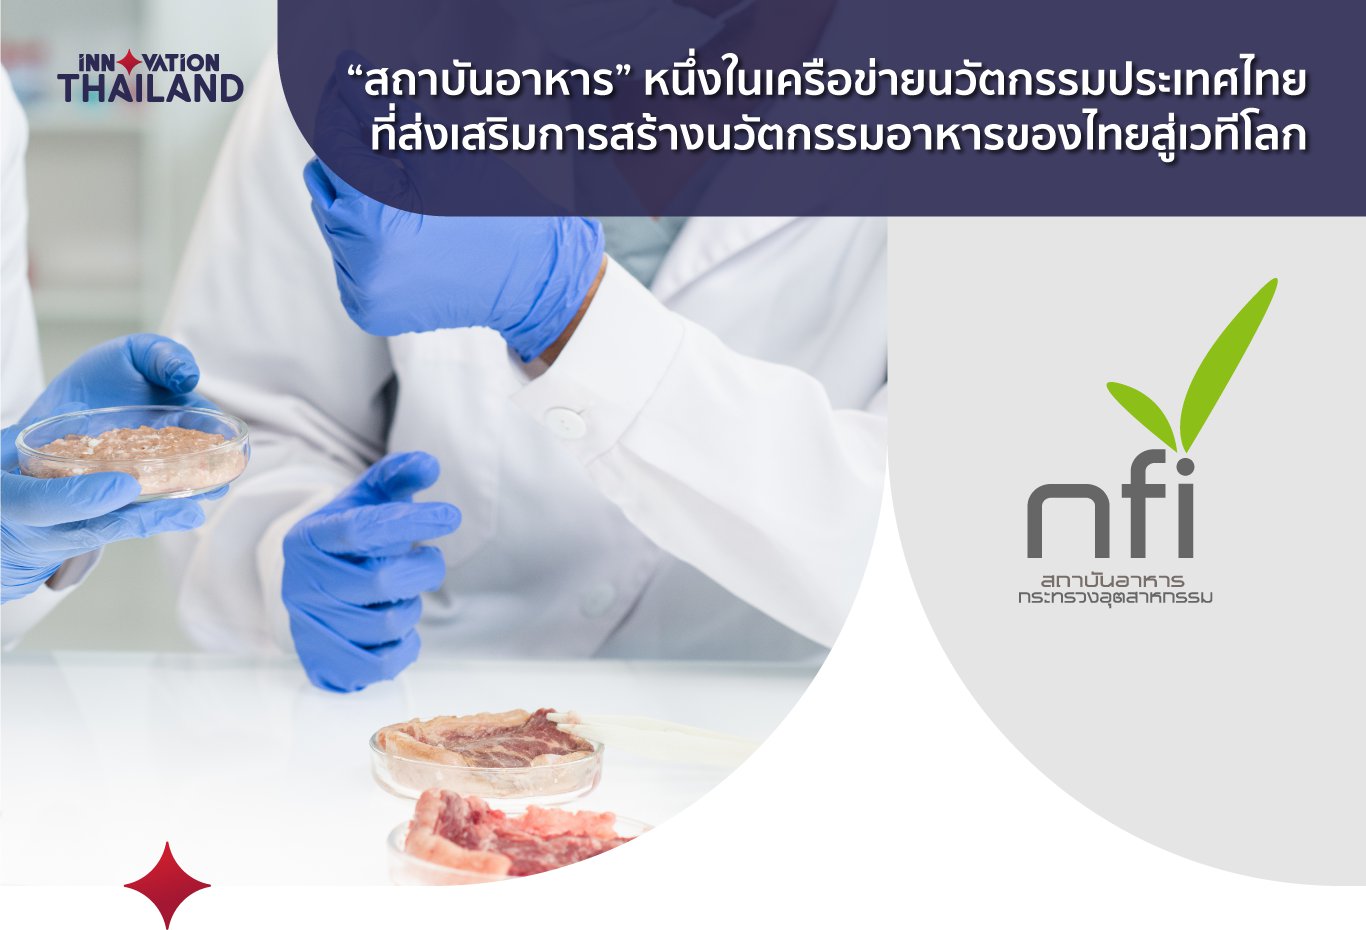 The National Food Institute – A Member of the Innovation Thailand Alliance Promoting Thai Food Innovations Globally